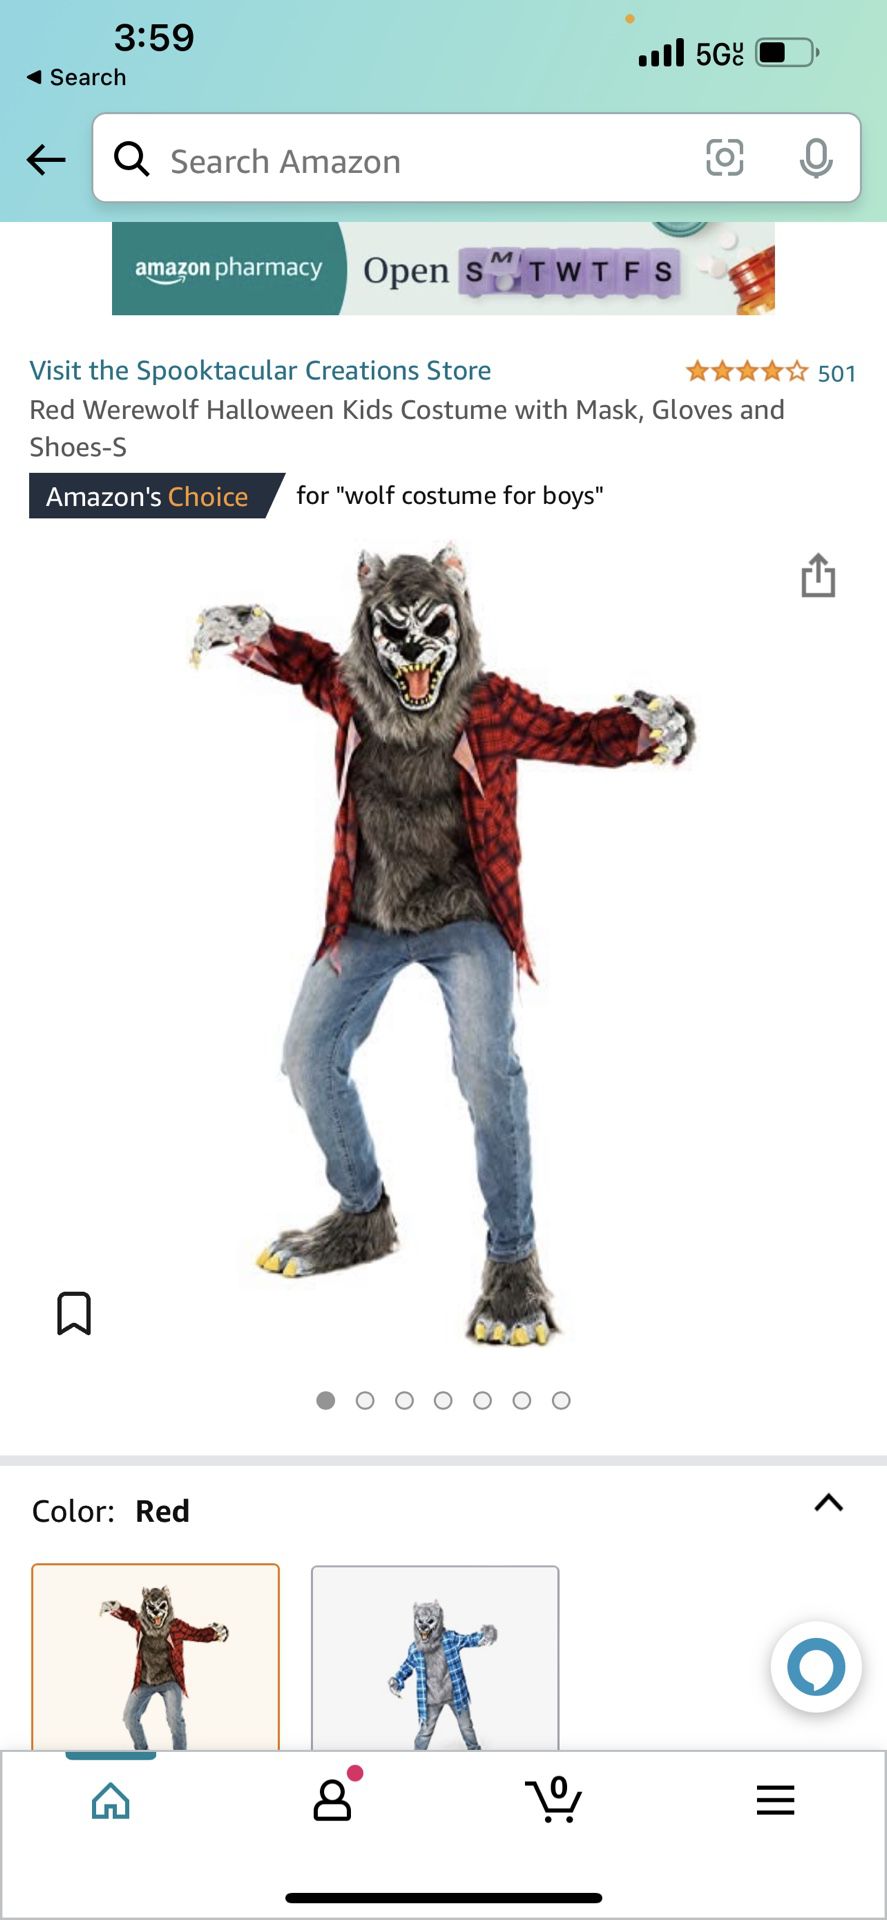 Red Werewolf Halloween Kids Costume with Mask, Gloves and Shoes-S